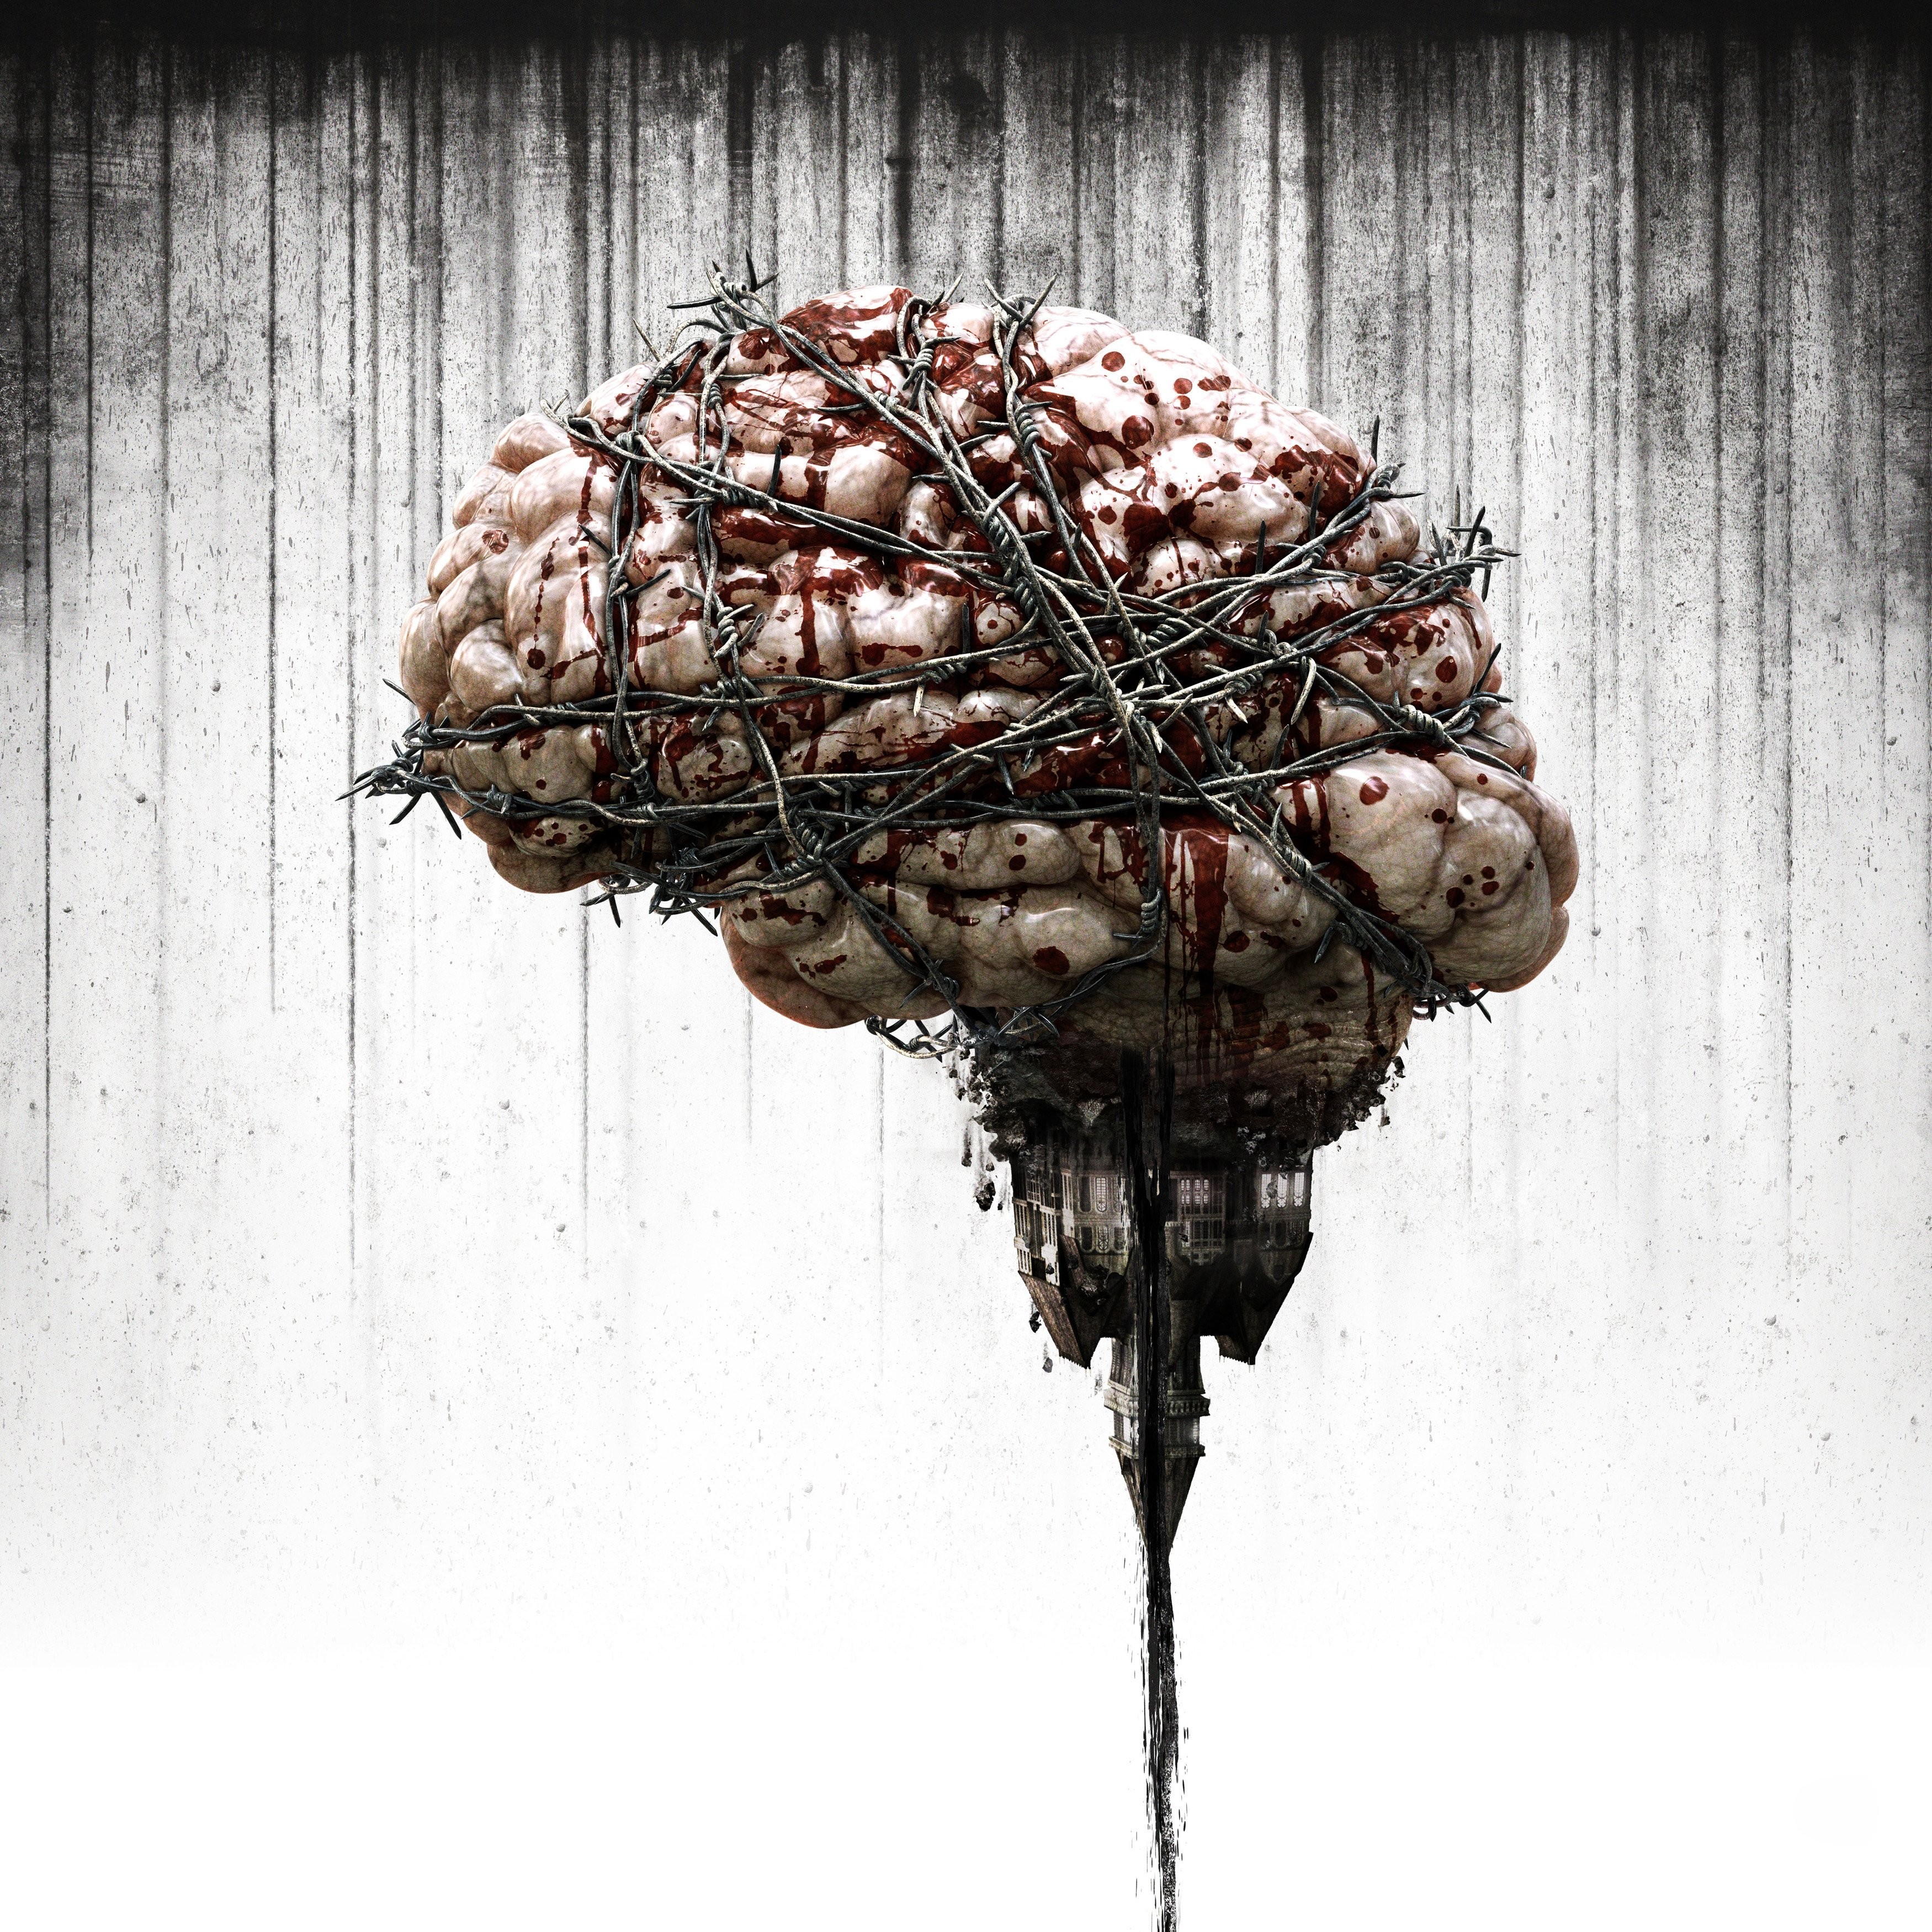 General 3500x3500 digital art brain The Evil Within video games barbed wire blood rocks old building house upside down simple background Bethesda Softworks Video Game Horror